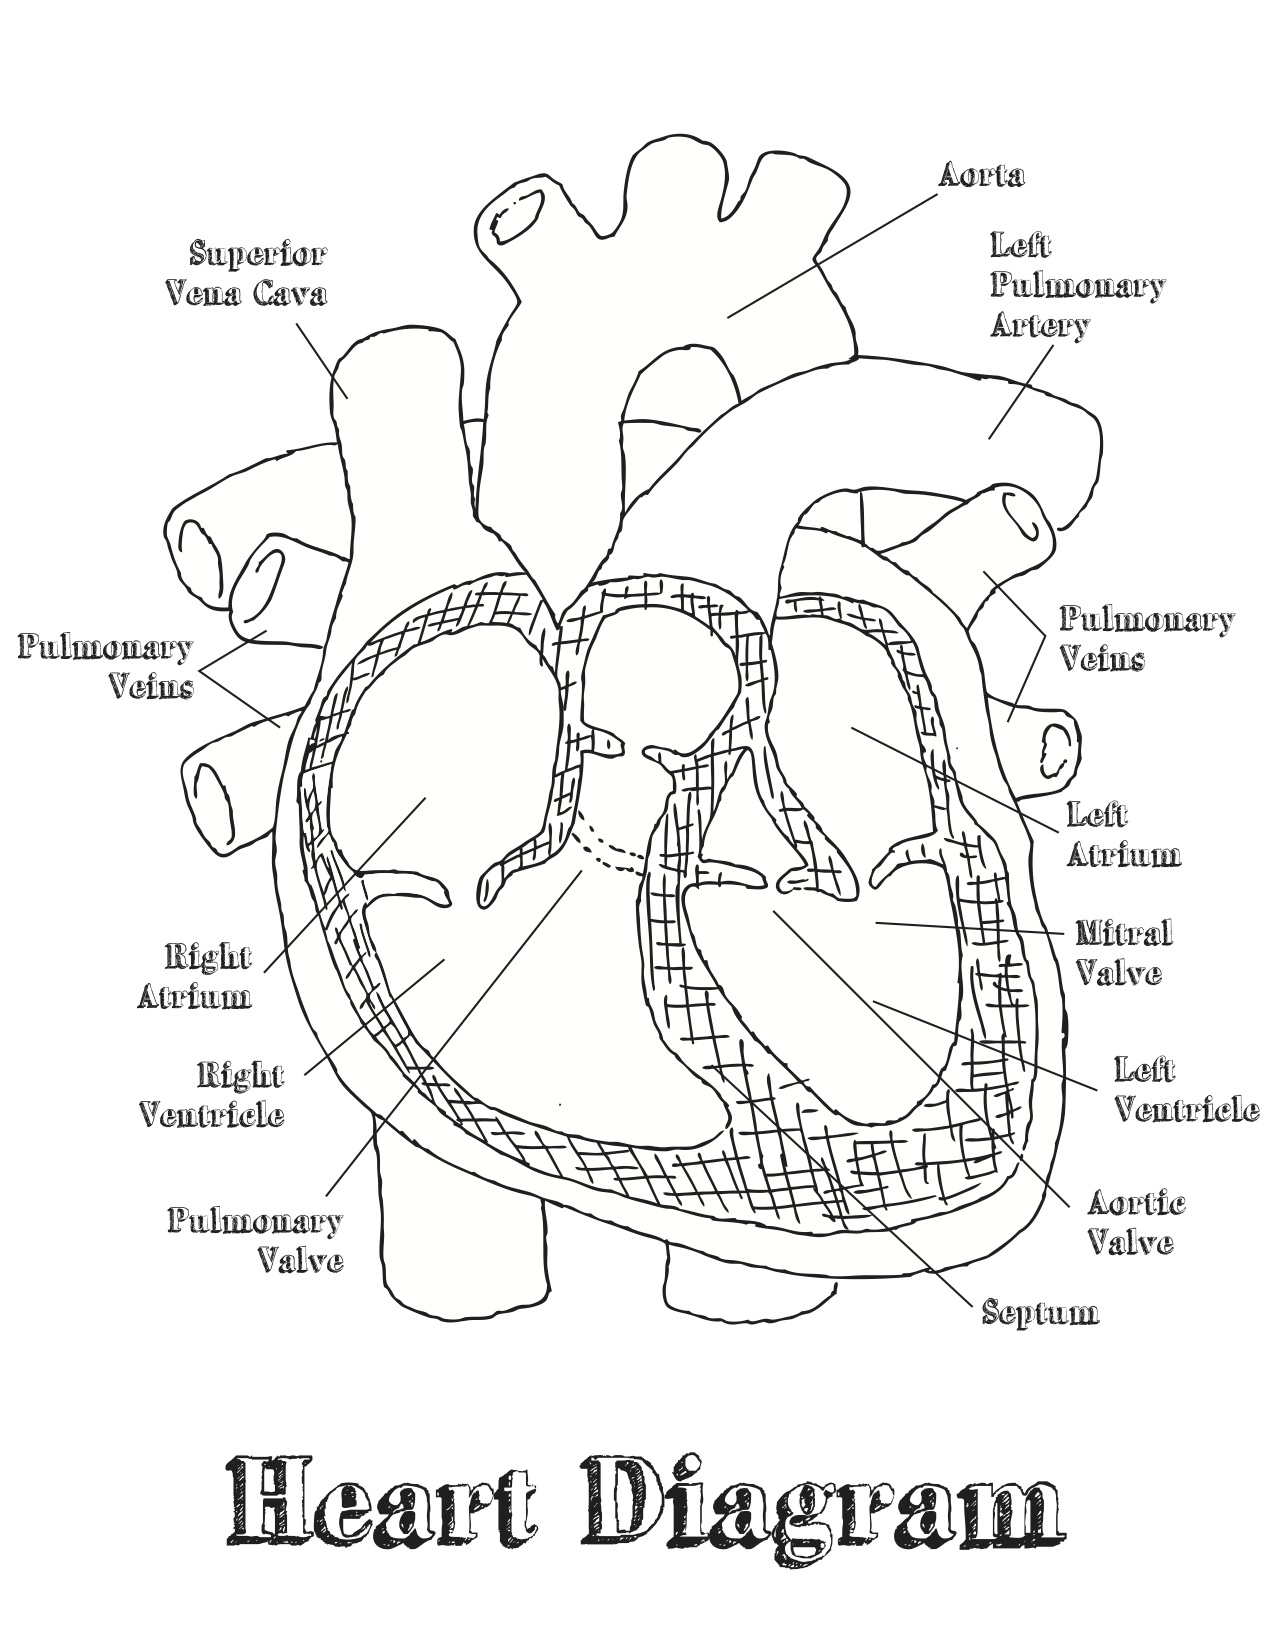 Labeled Heart Diagram Free Blank Heart Diagram Download Free Clip Art Free Clip Art On